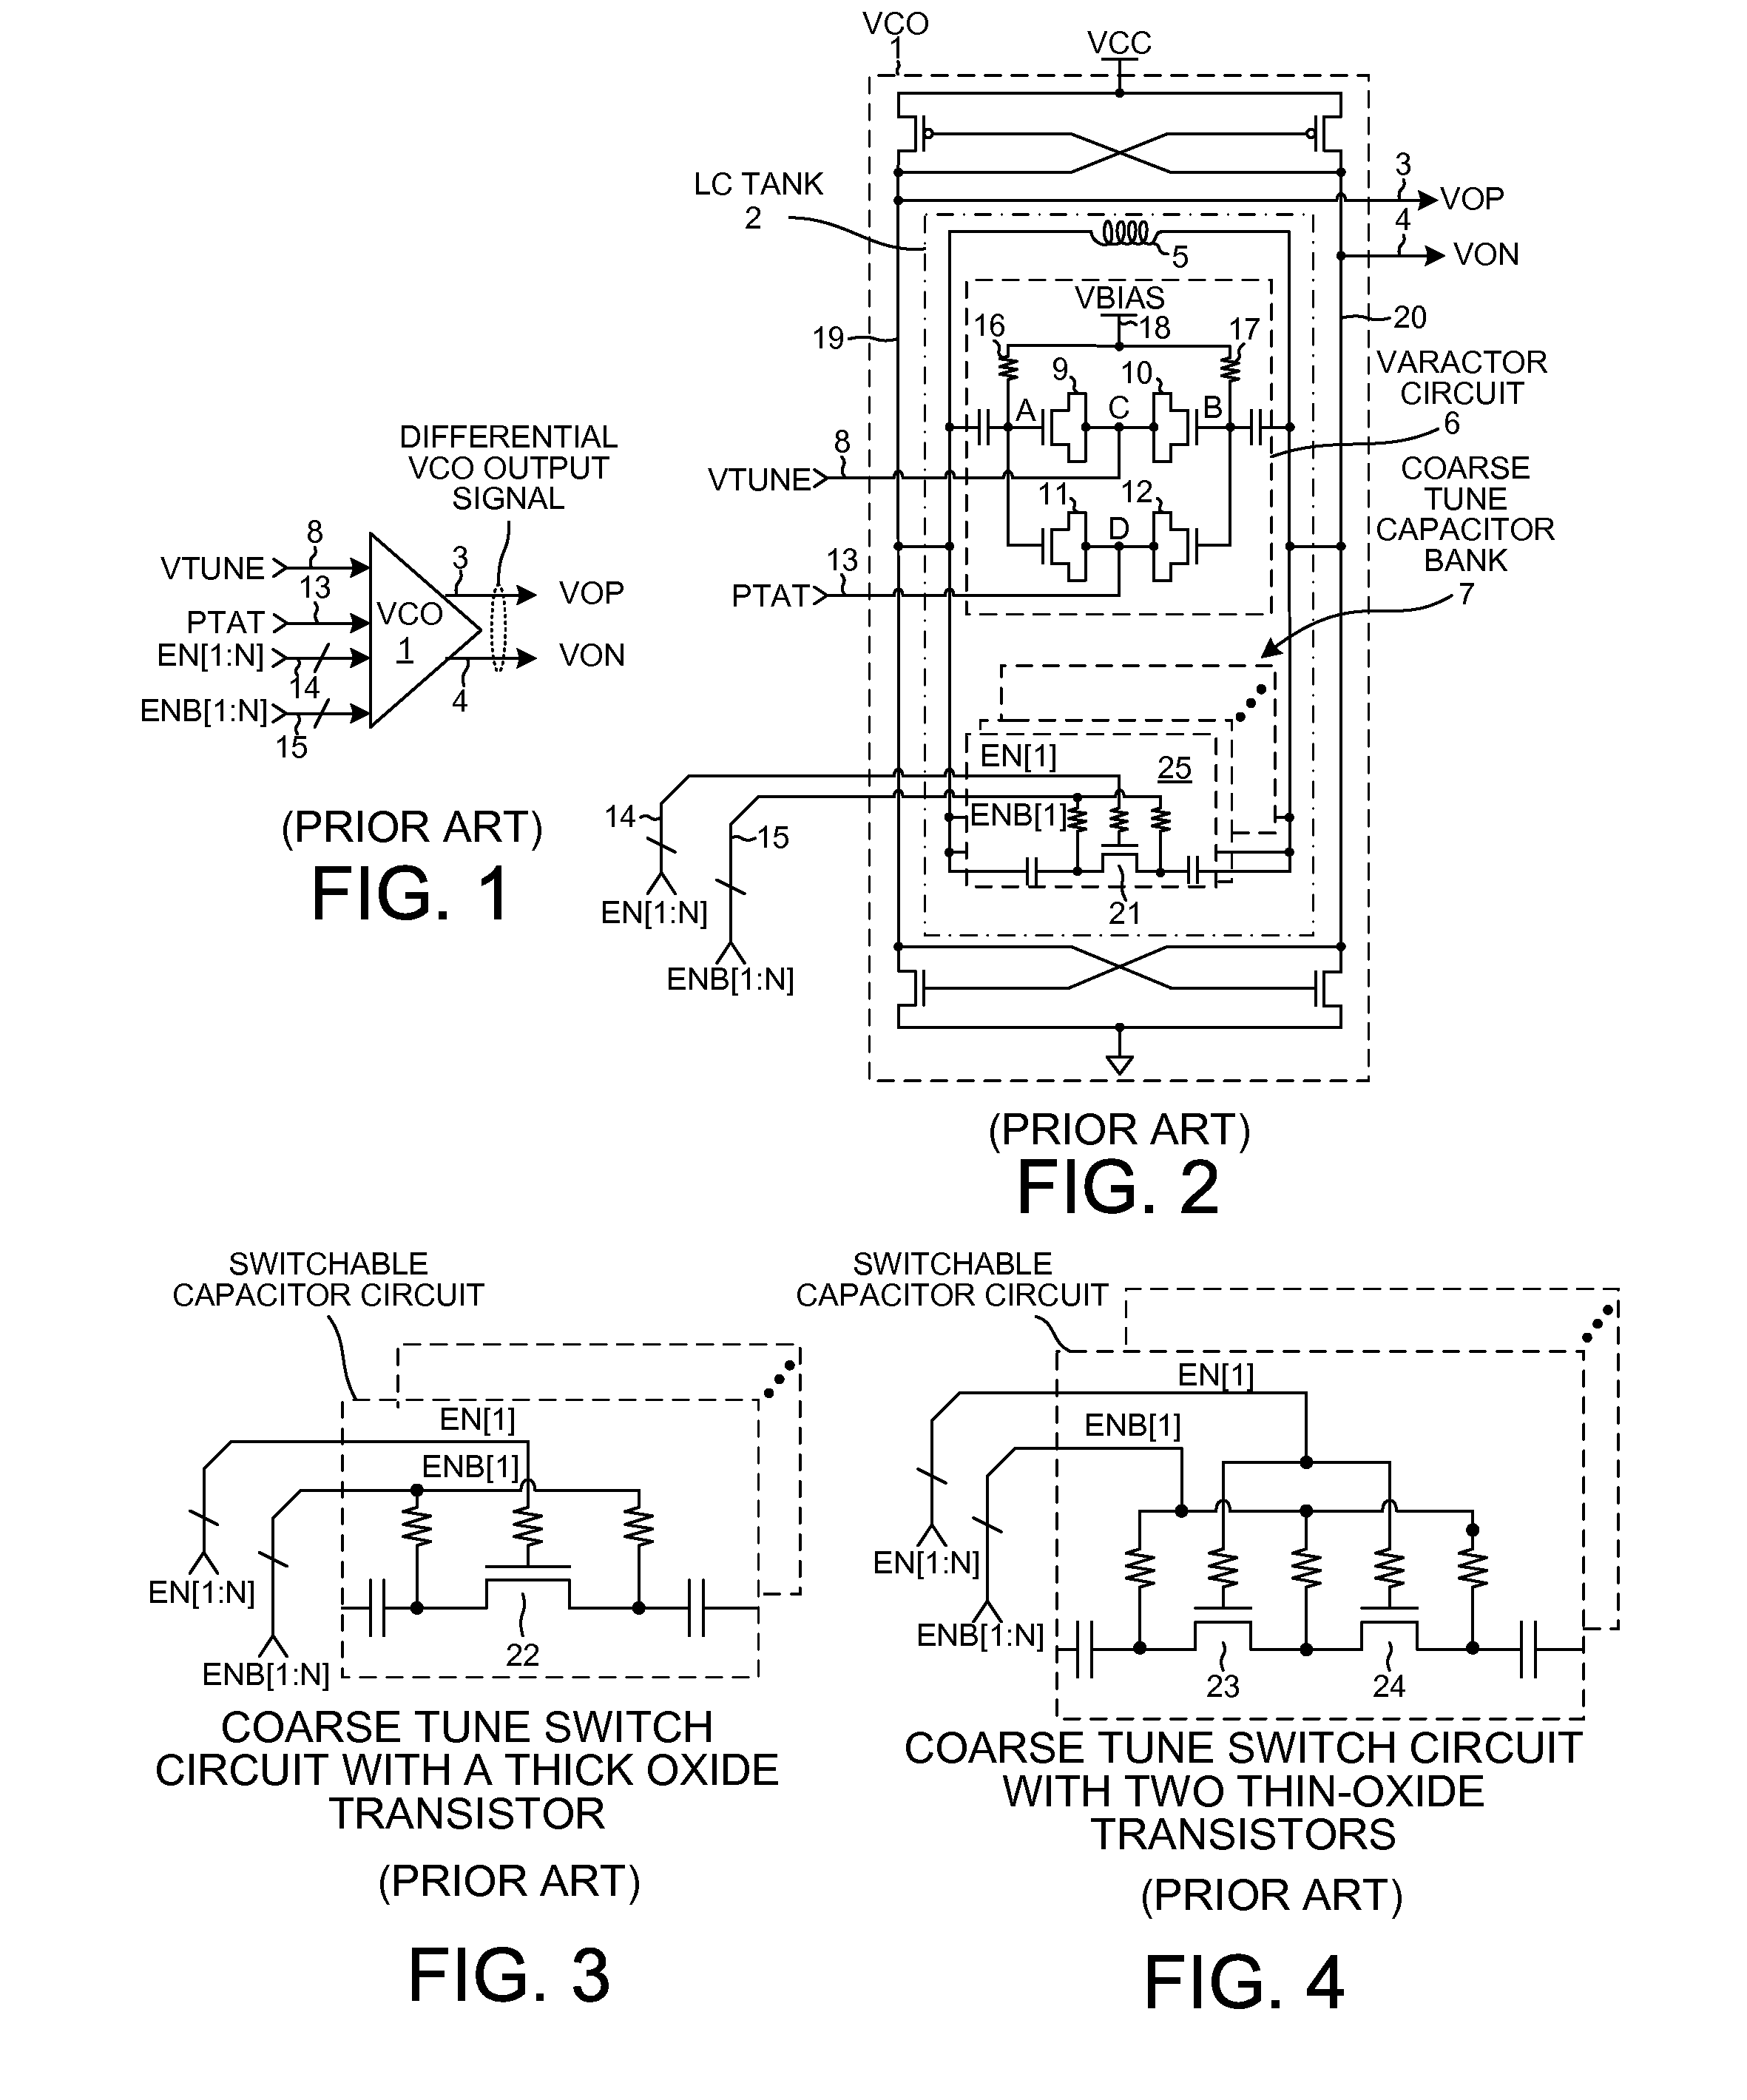 Temperature compensation and coarse tune bank switches in a low phase noise vco